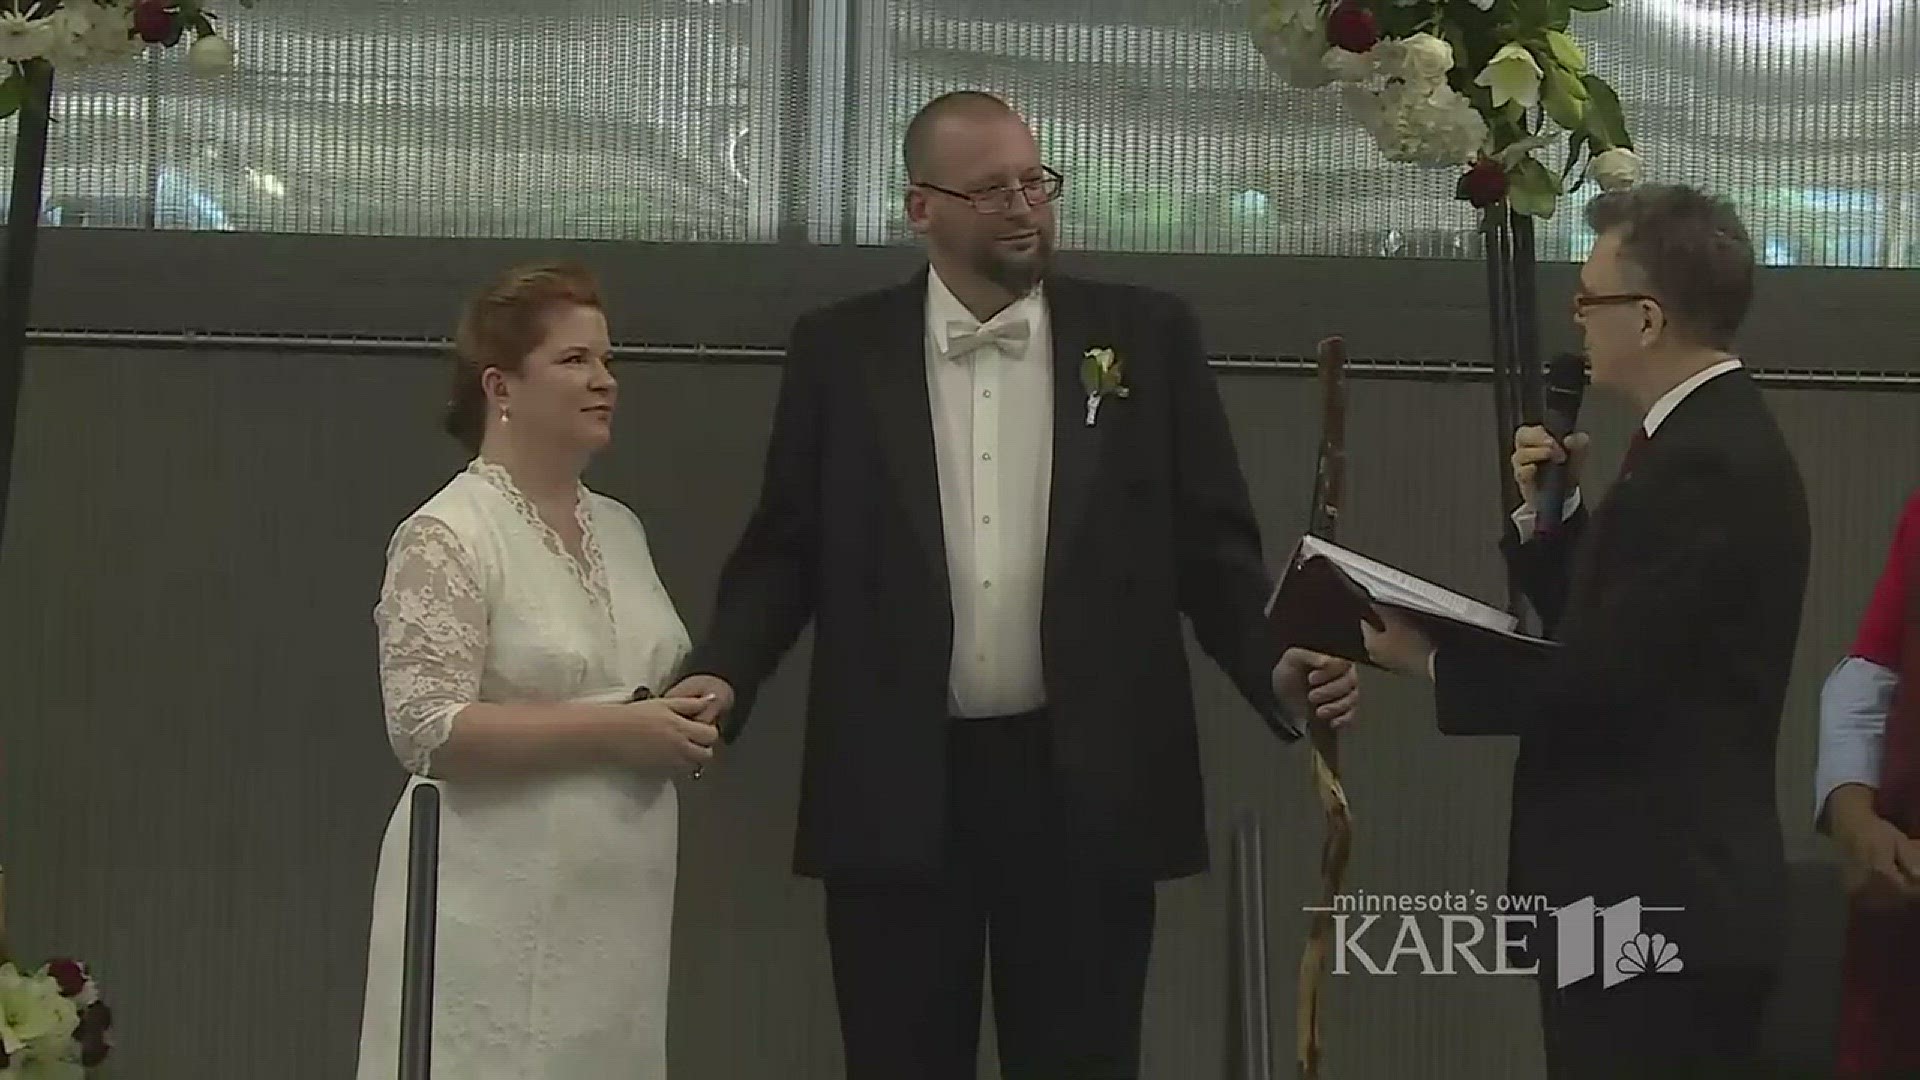 A Minnesota couple who began their life together through an arranged marriage nearly 20 years ago renewed their vows Friday.